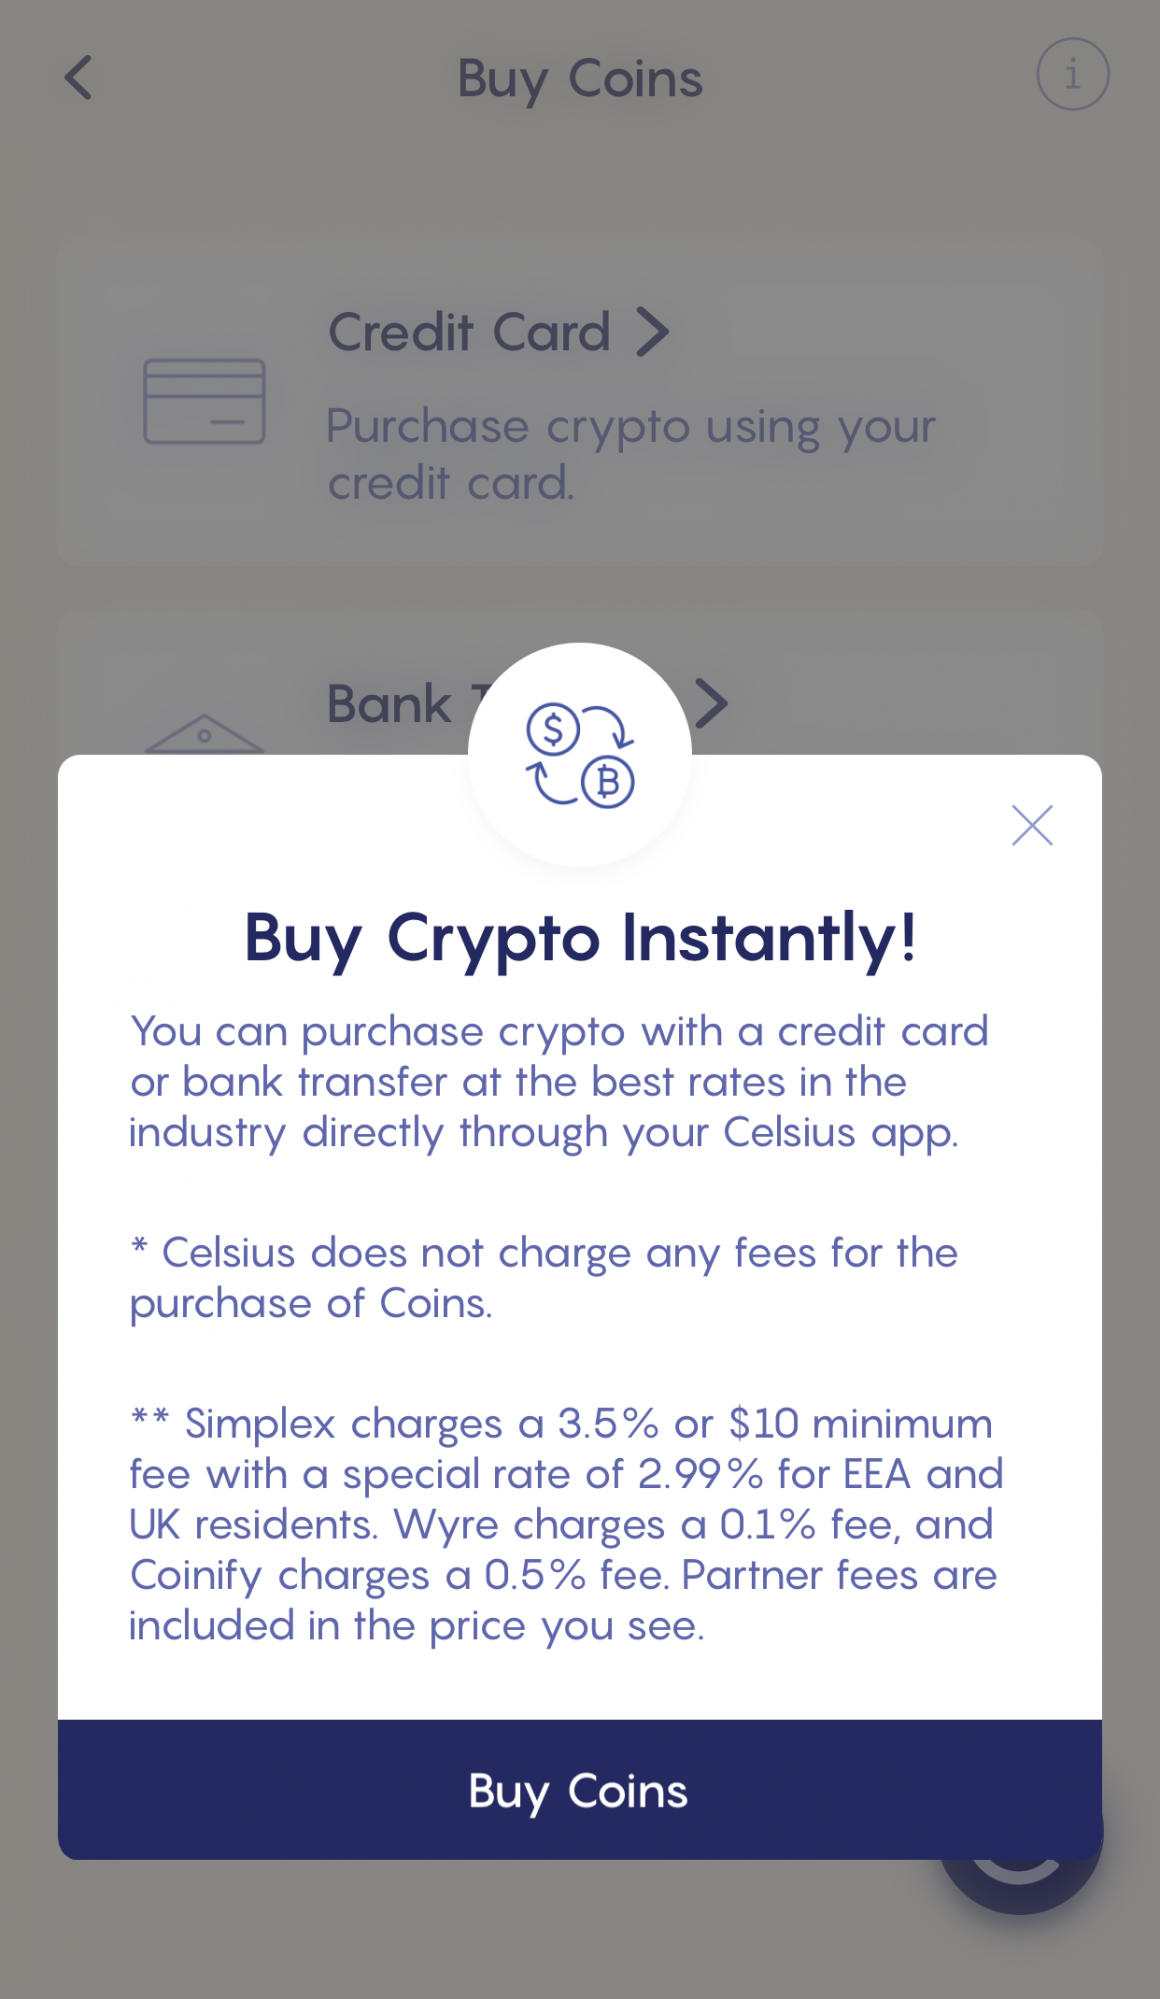 Crypto.com Vs Celsius - Which Platform Is Better? (2021 ...